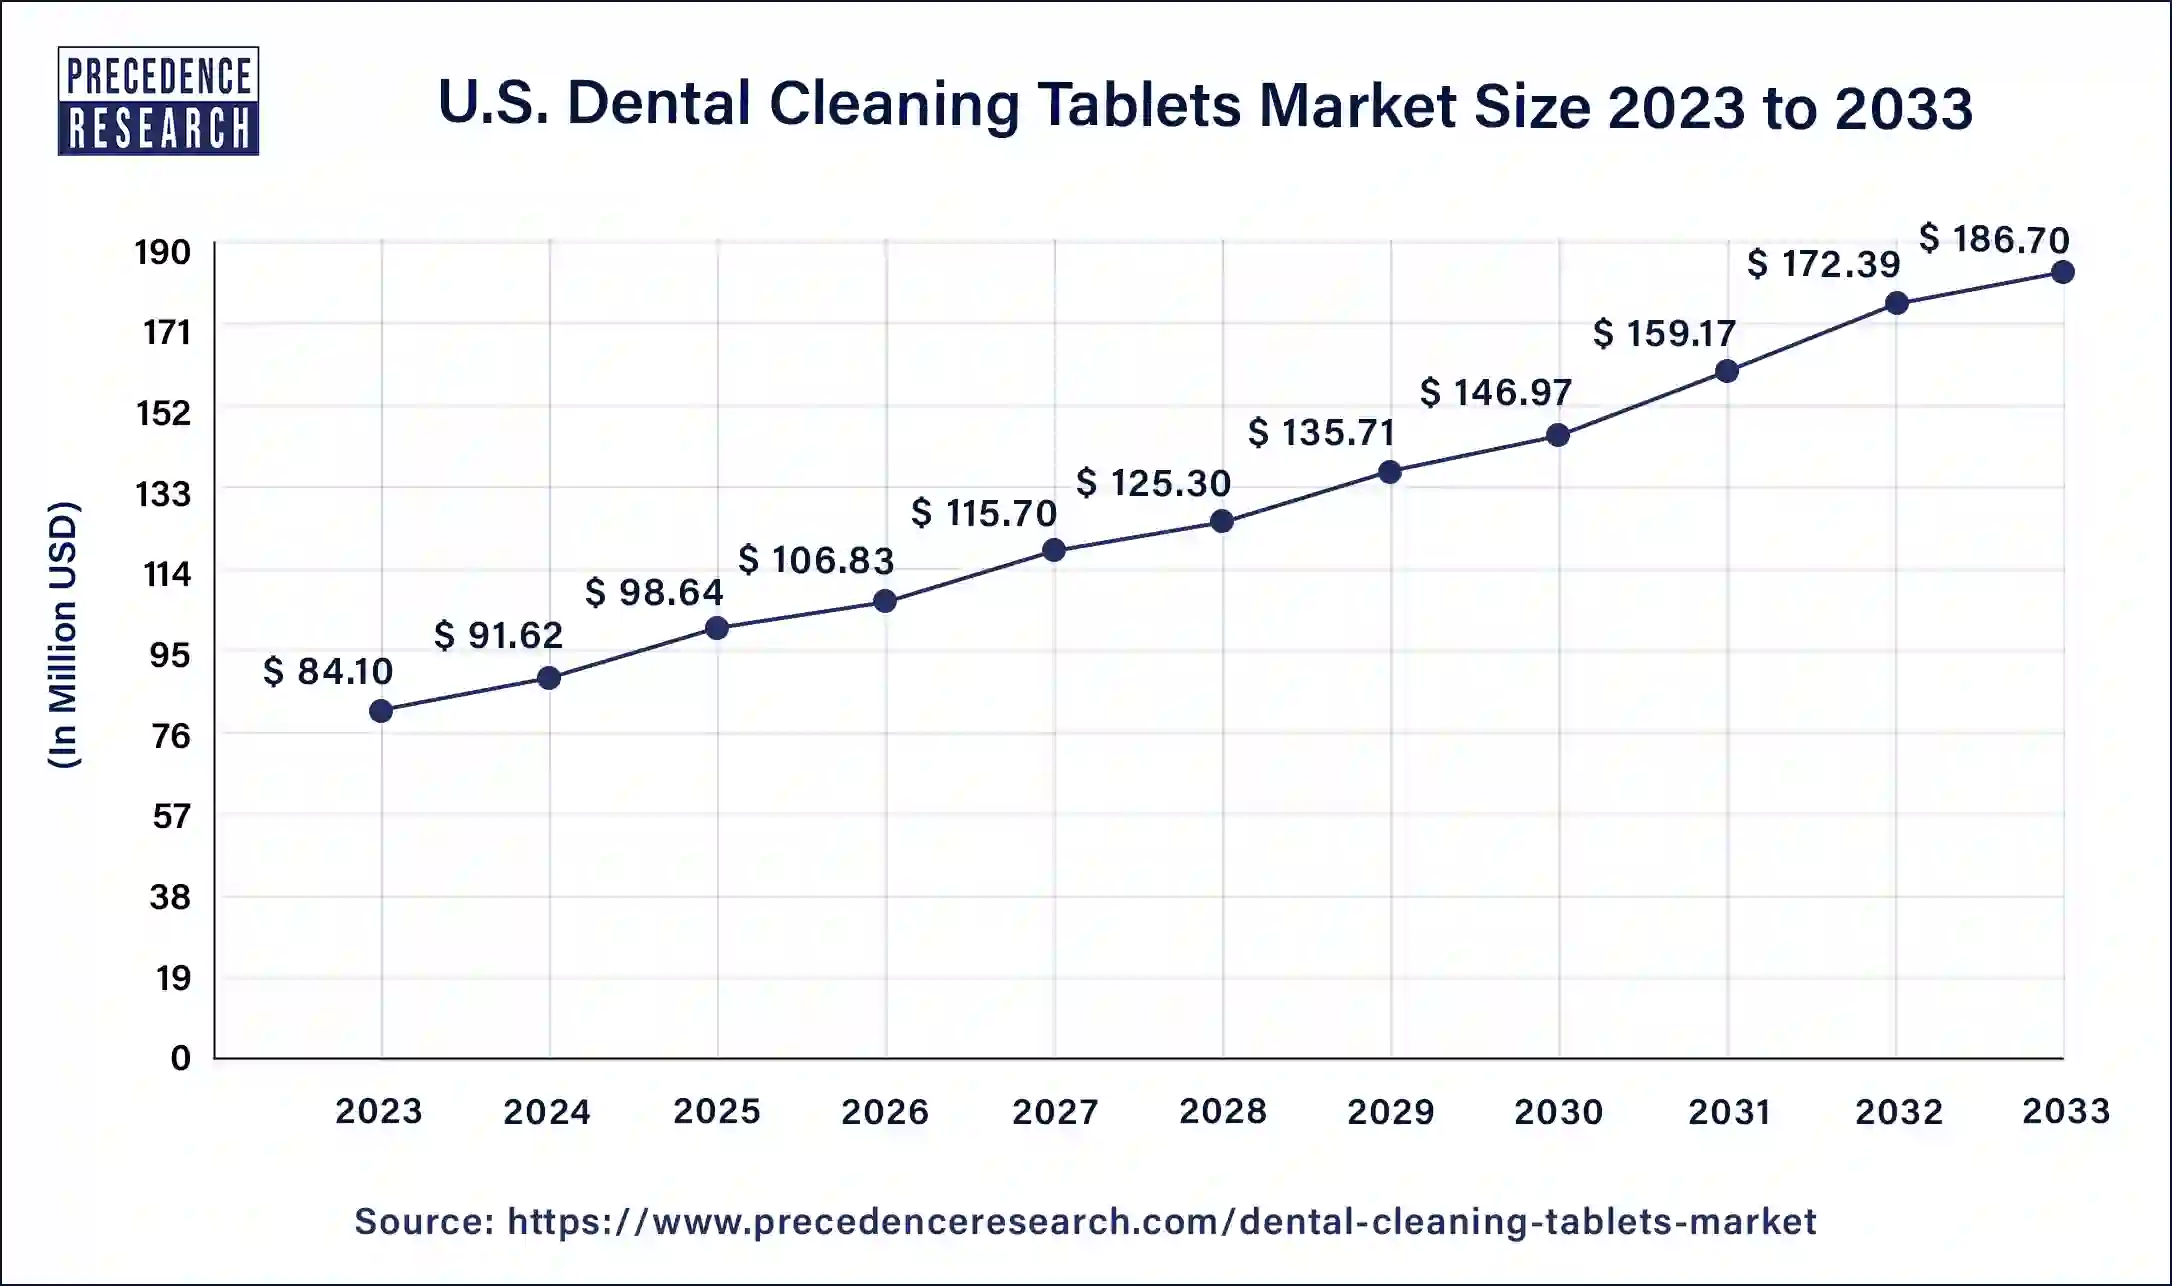 U.S. Dental Cleaning Tablets Market Size 2024 to 2033